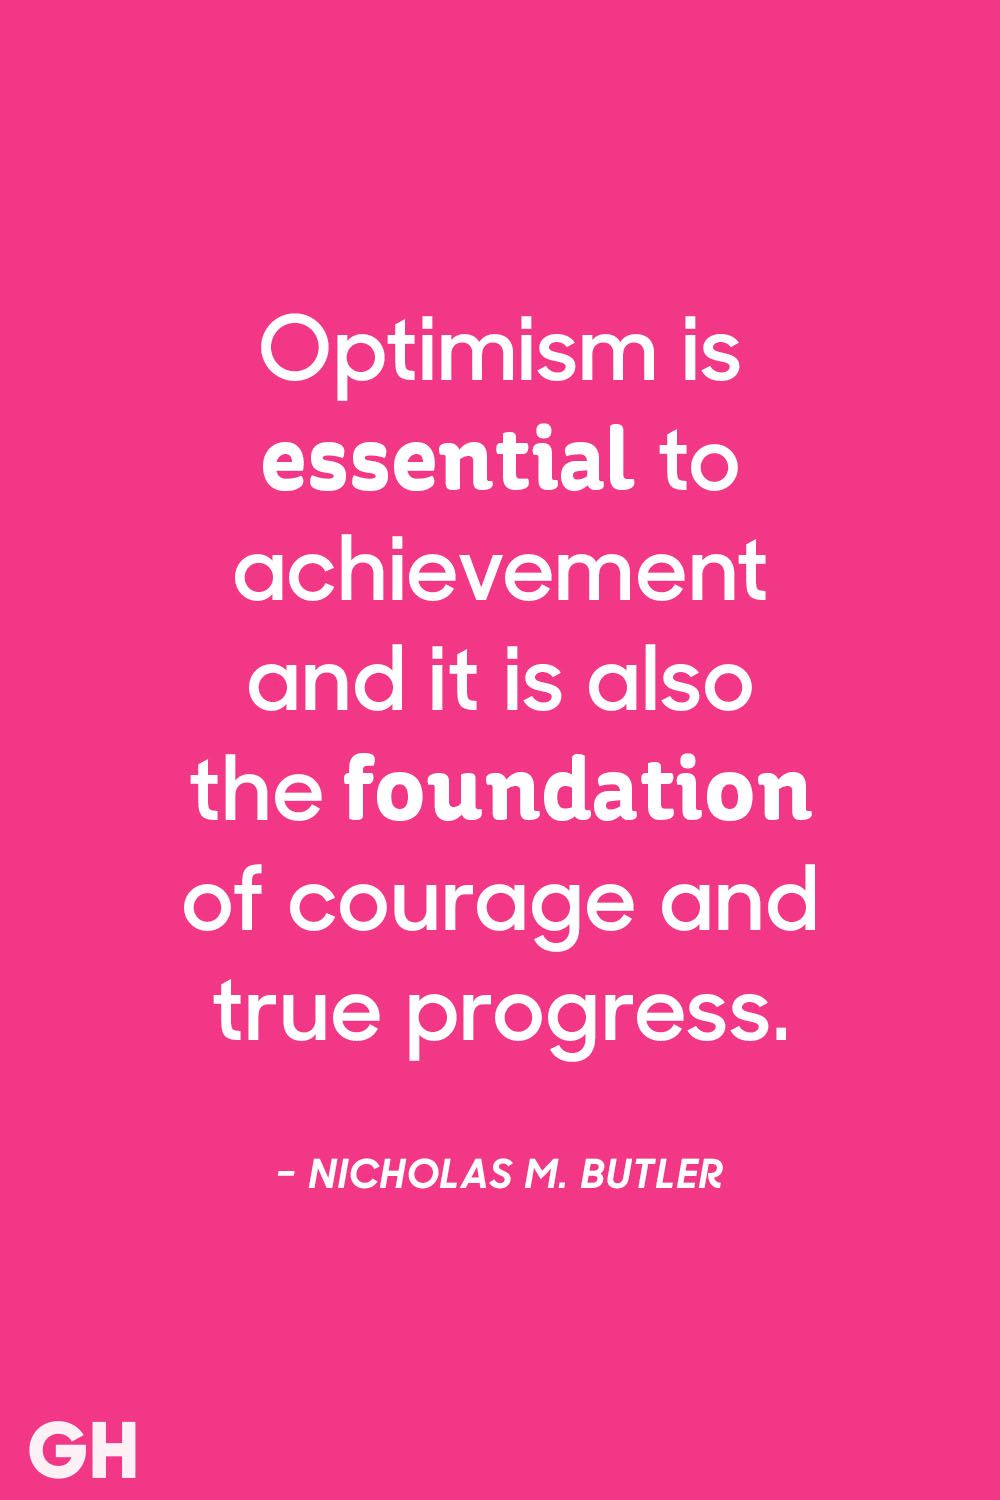 21 Most Optimistic Quotes Positive Sayings To Inspire Optimism